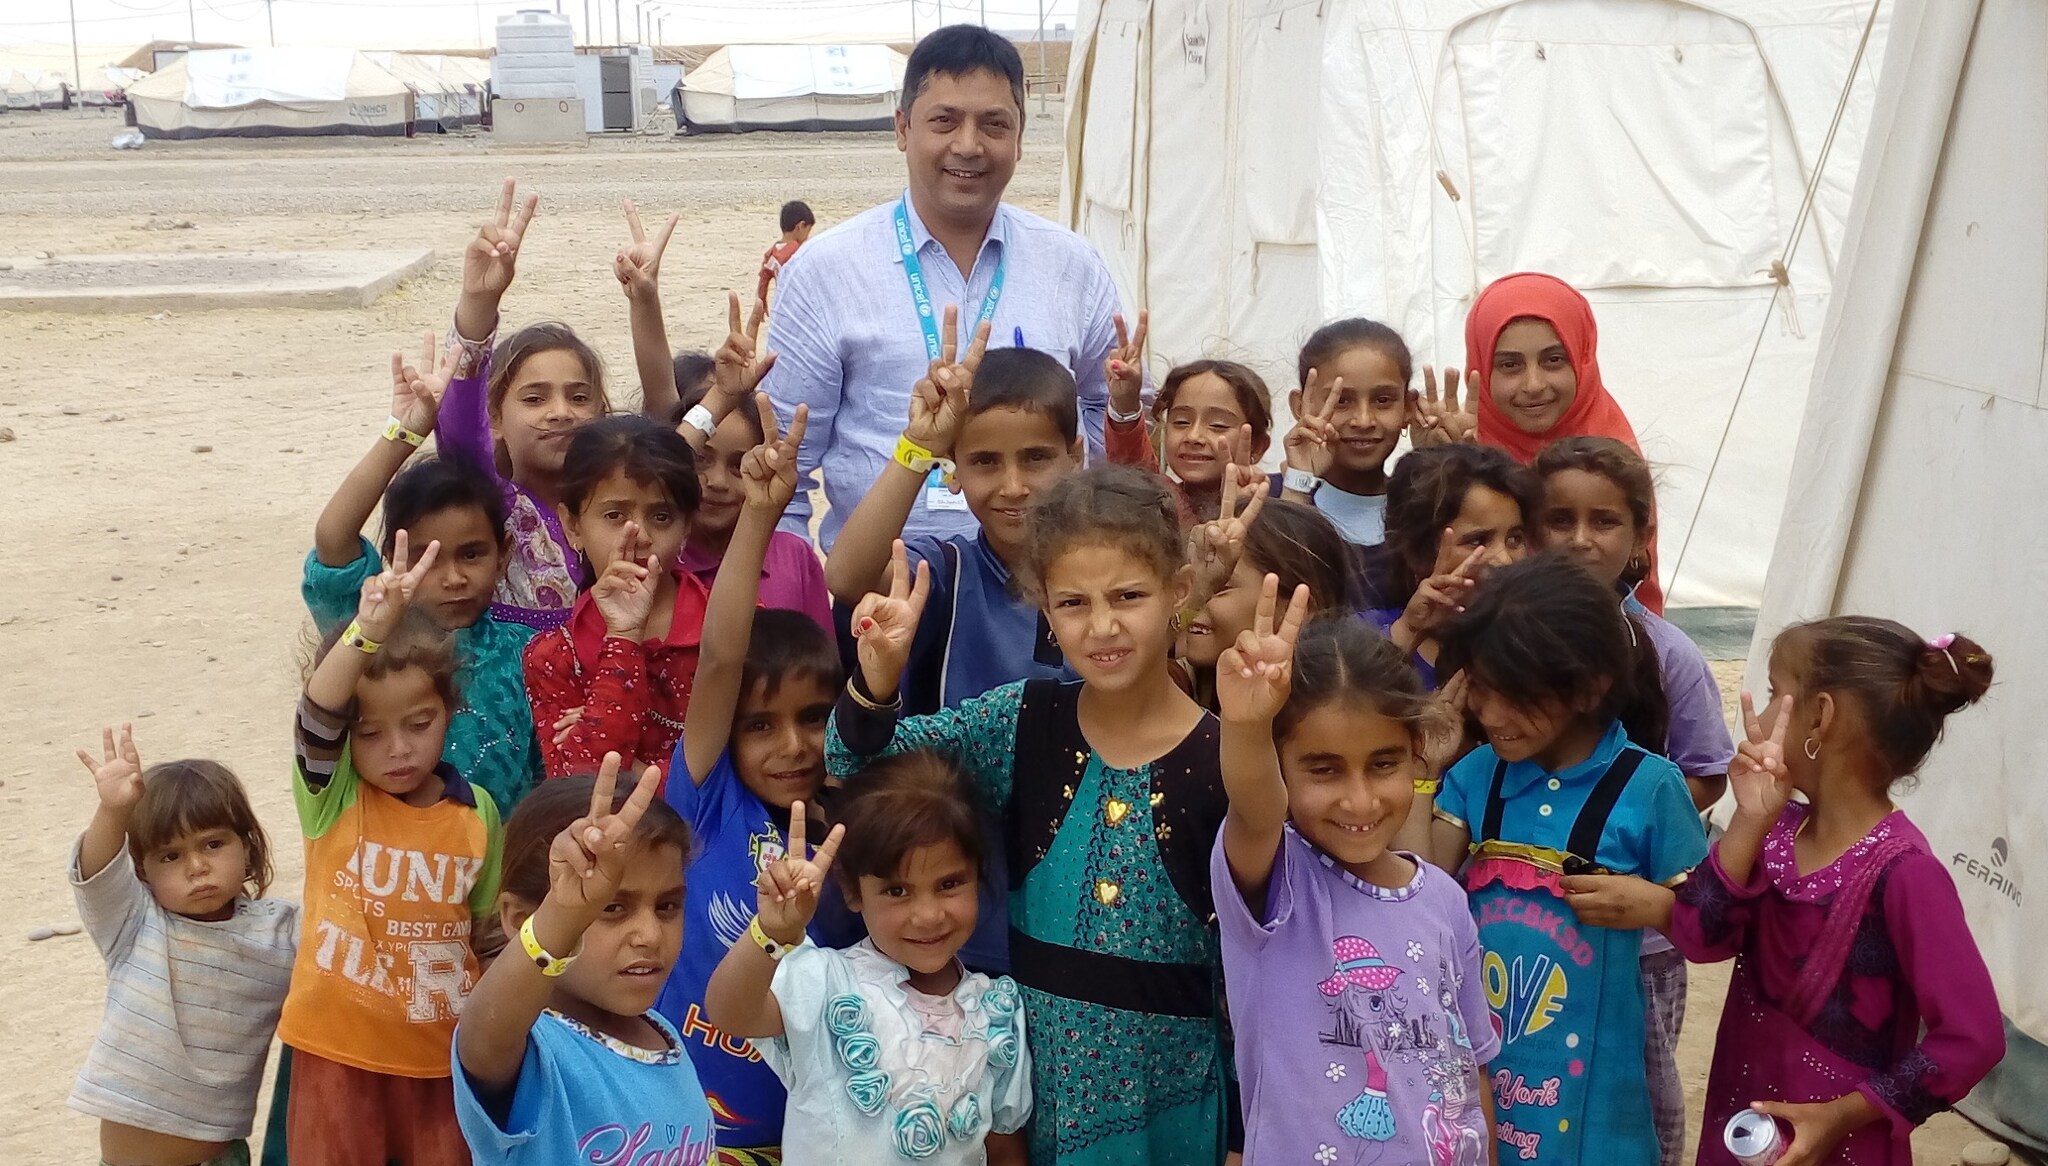 Smiling children and STOP participant in Syria after successful vaccination campaign 